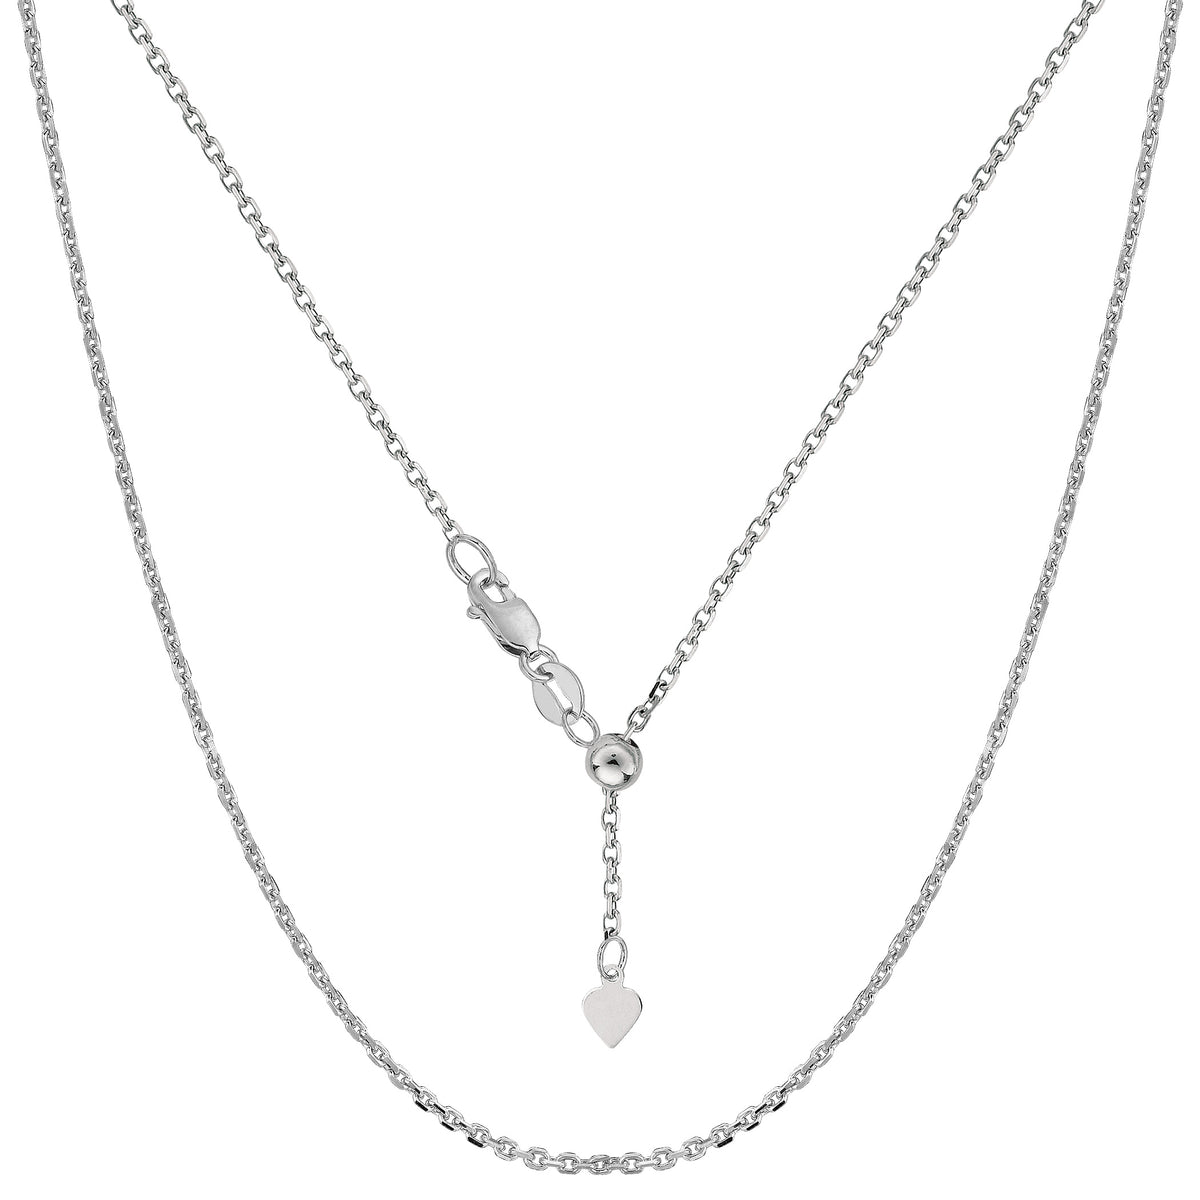 10k White Gold Adjustable Cable Link Chain Necklace, 0.9mm, 22" fine designer jewelry for men and women